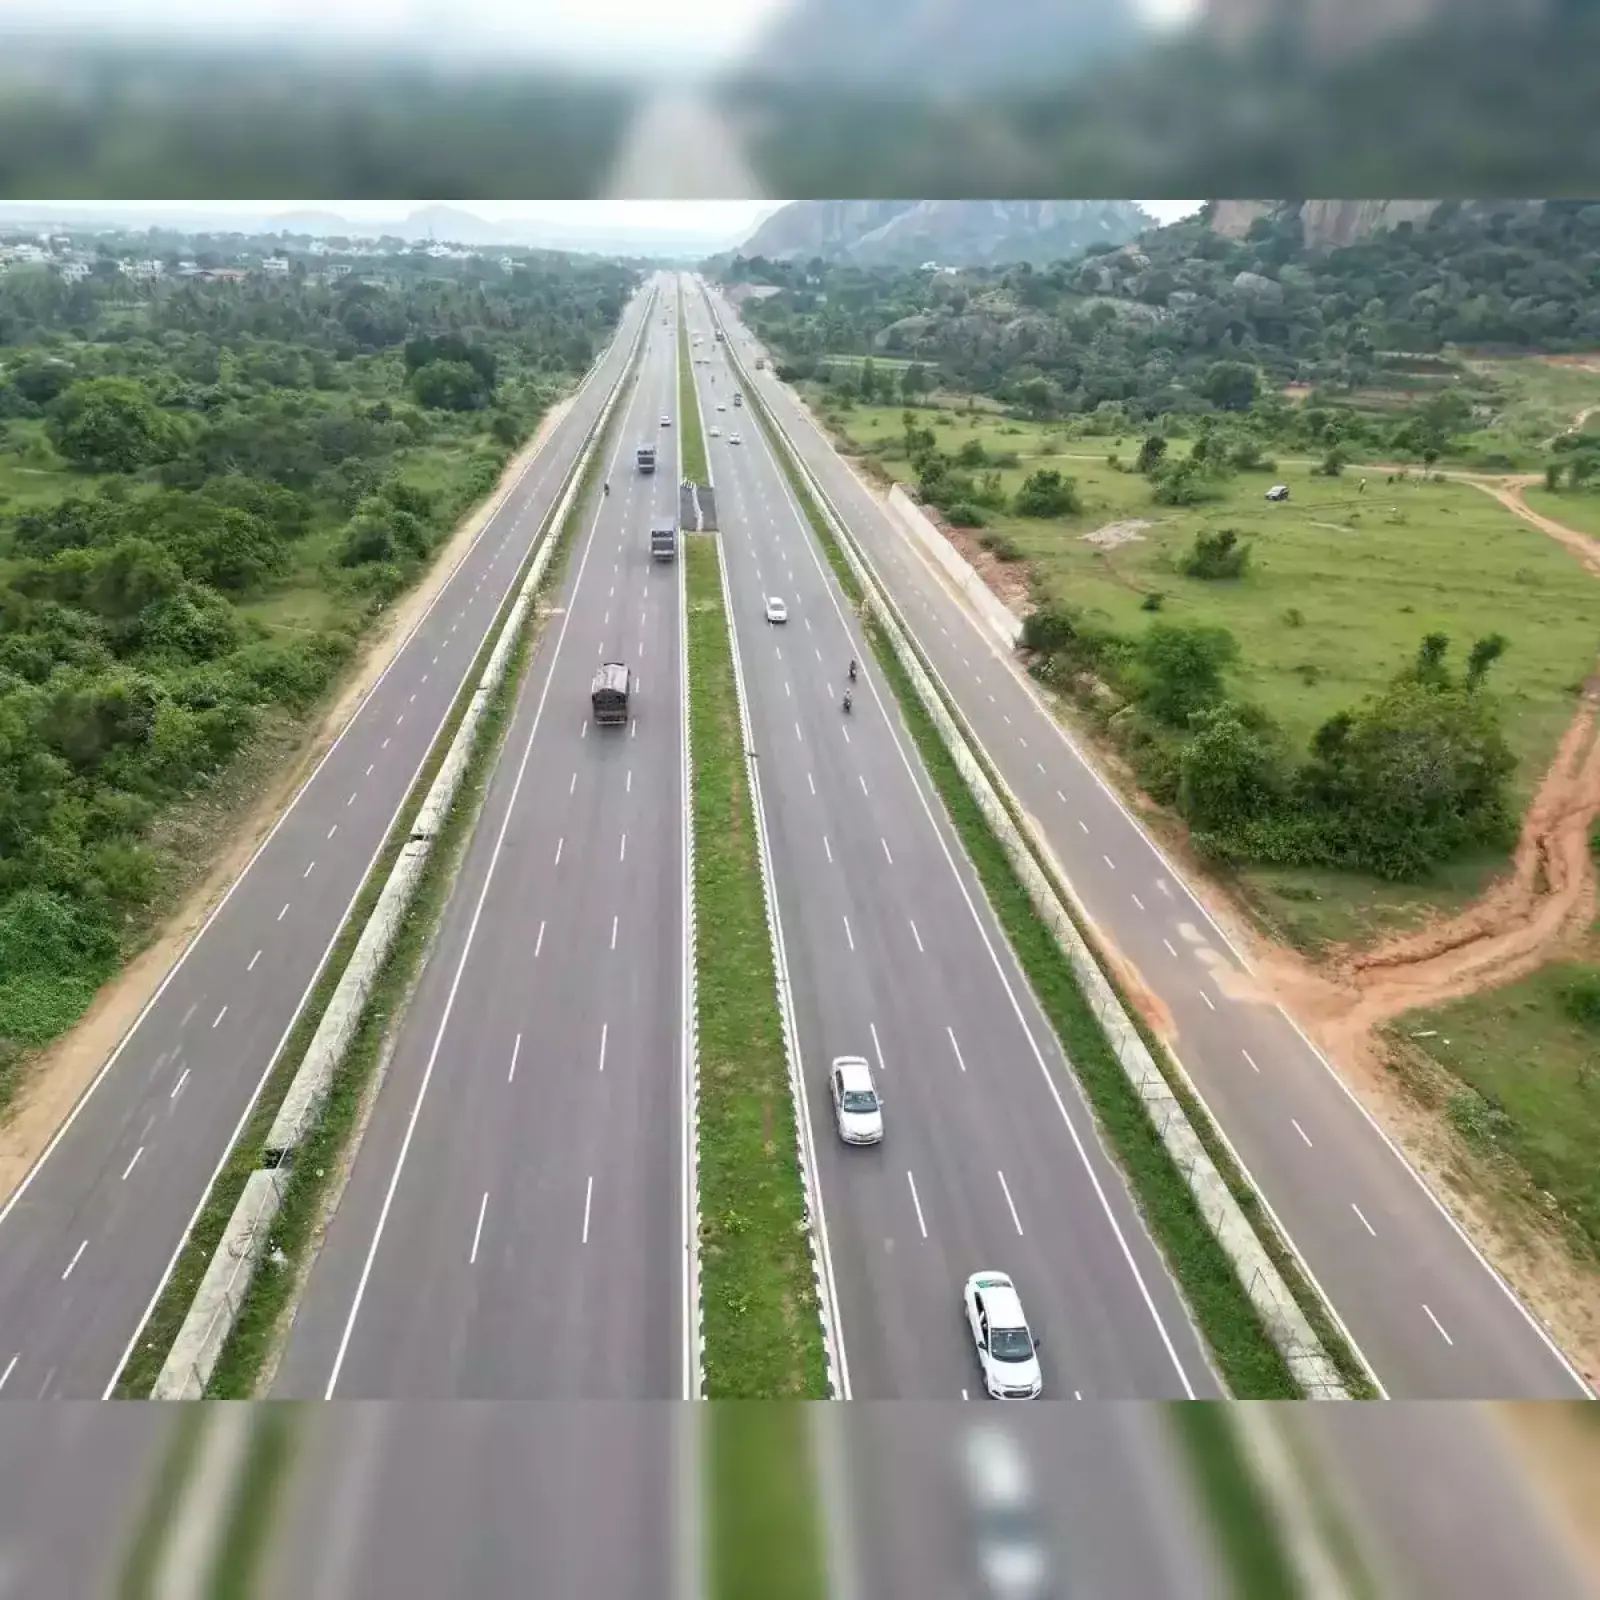 NHAI will provide 'world-class' roadside facilities on National Highway, will attract global experts